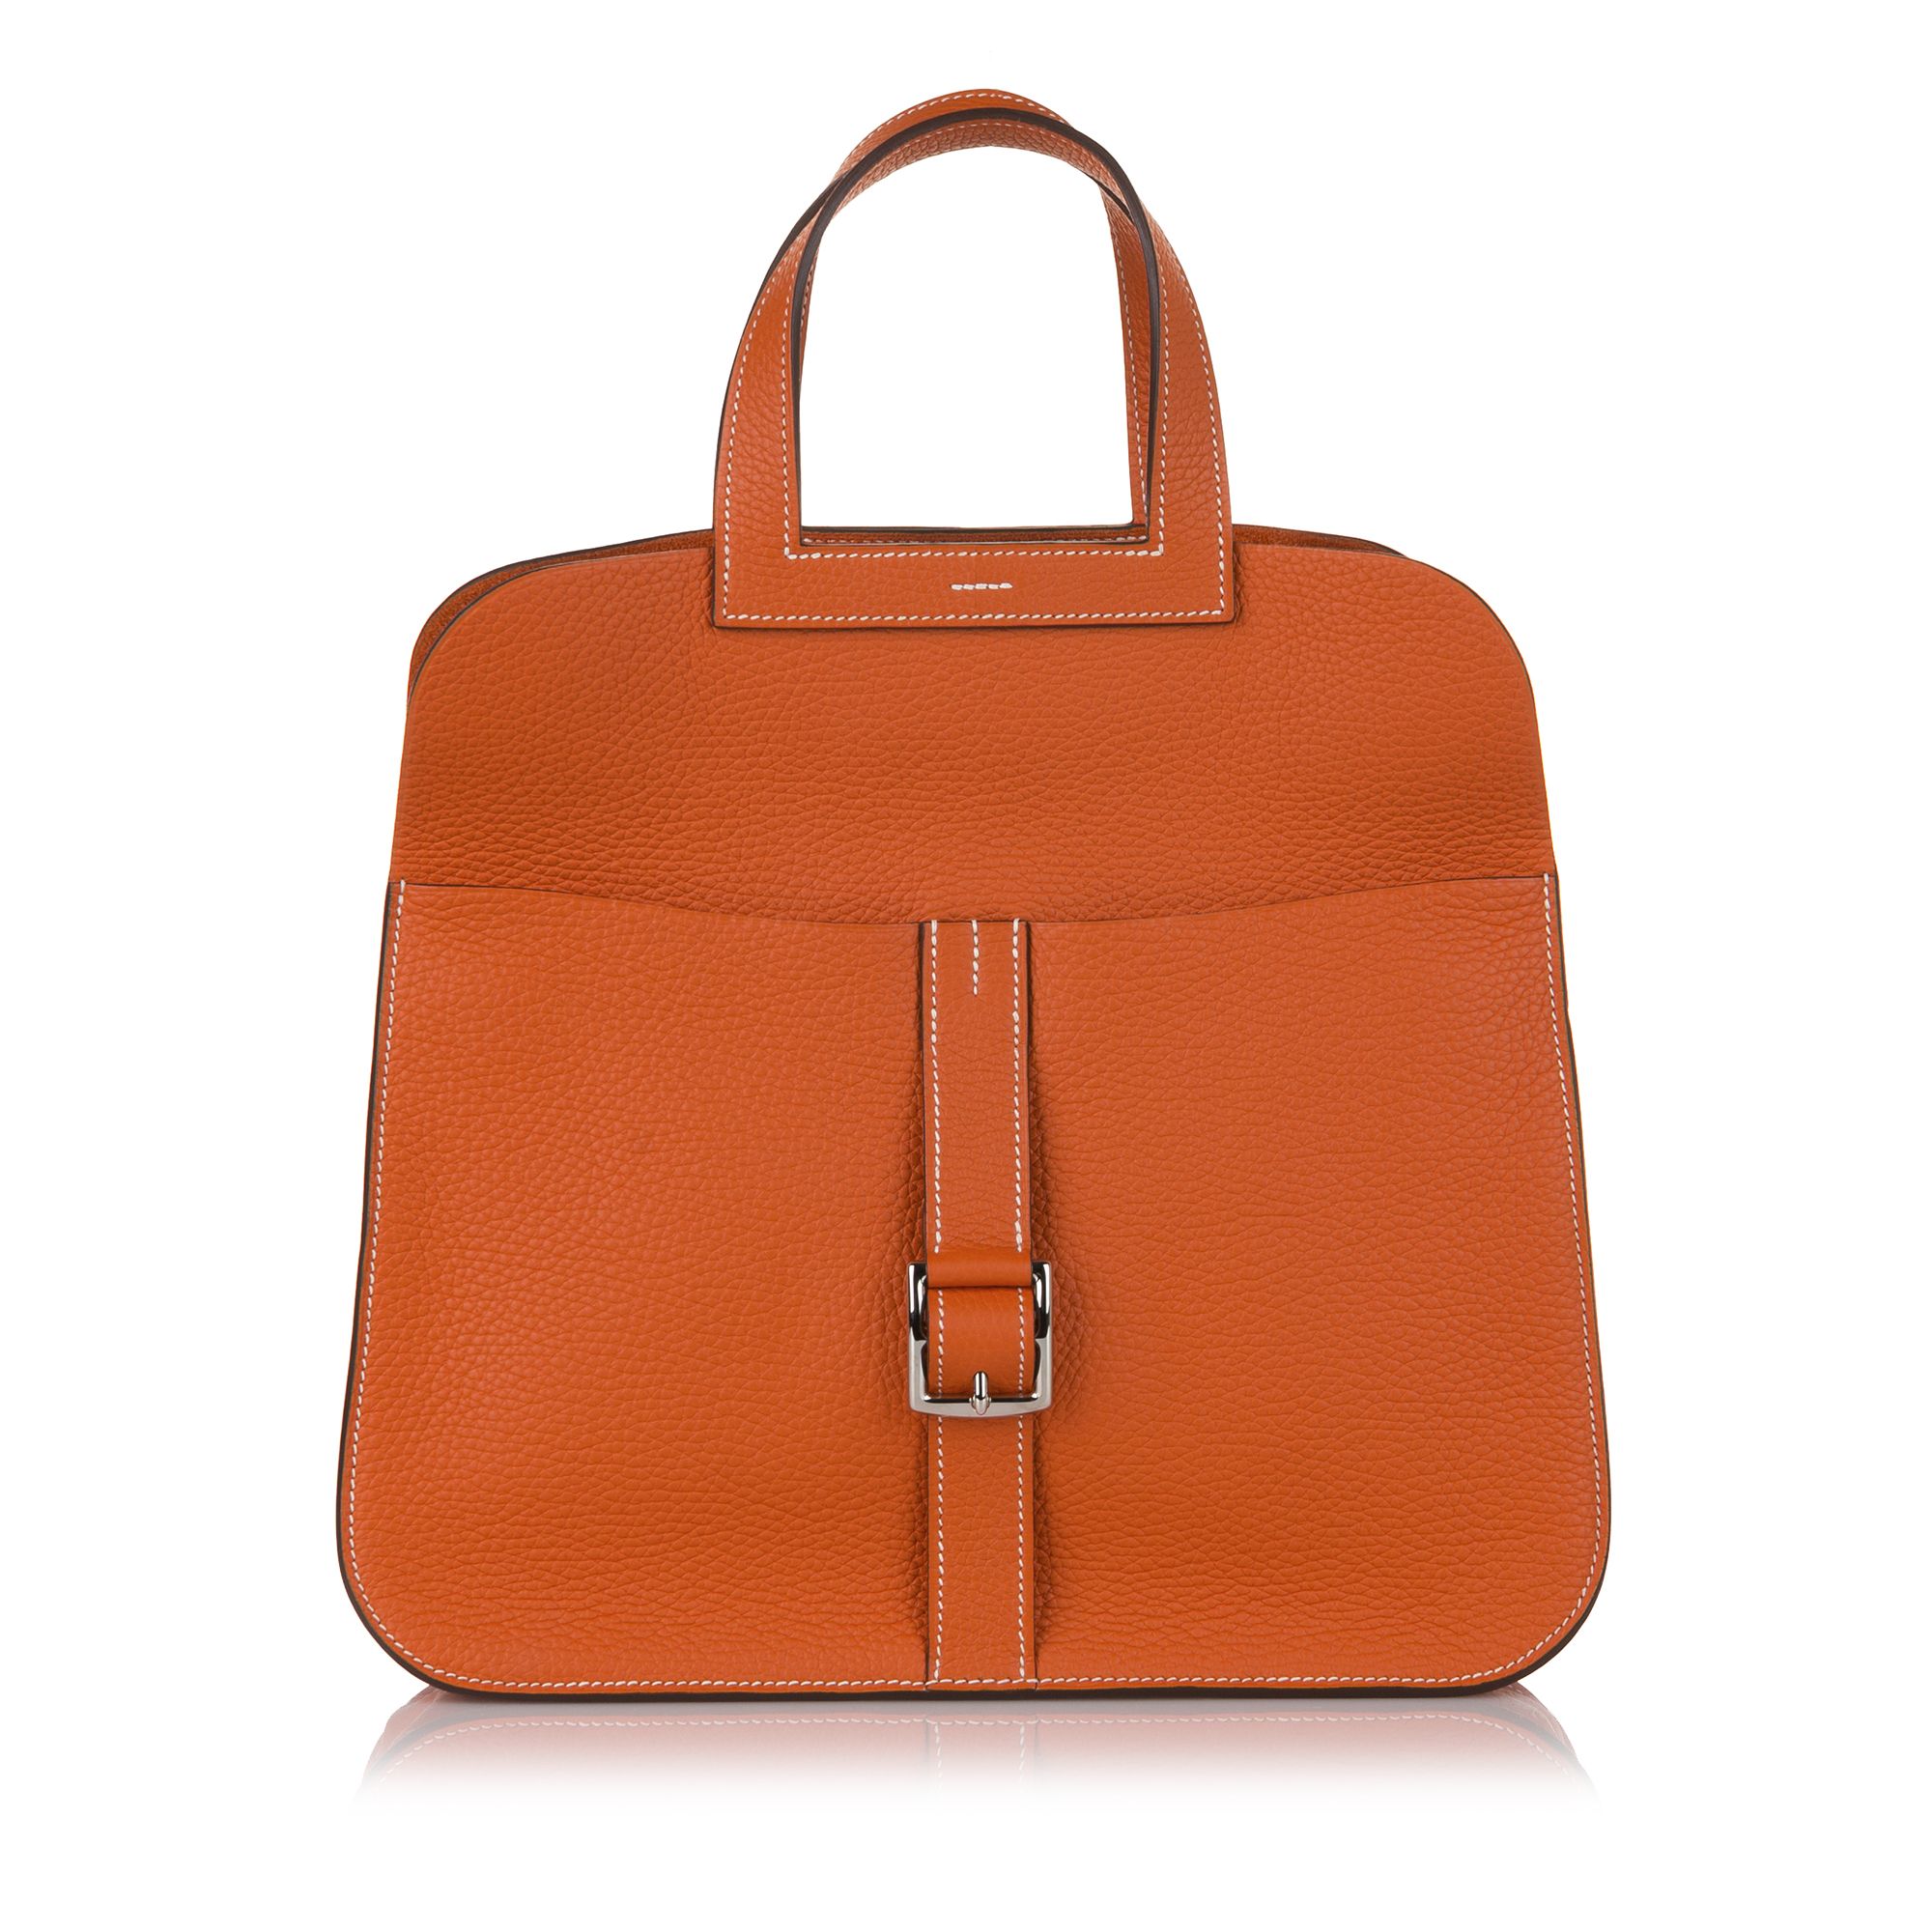 VINTAGE. RRP AS NEW. The Swift Halzan features a leather body, a detachable flat shoulder strap, a front flap with buckle closure, silver hardware, leather lining, and interior slip pocket.

Dimensions:
Length 20cm
Width 31cm
Depth 9cm
Hand Drop 11cm
Shoulder Drop 52cm

Original Accessories: Dust Bag, Box

Color: Orange
Material: Leather x Calf
Country of Origin: France
Boutique Reference: SSU178068K1342


Product Rating: VeryGoodCondition

Certificate of Authenticity is available upon request with no extra fee required. Please contact our customer service team.